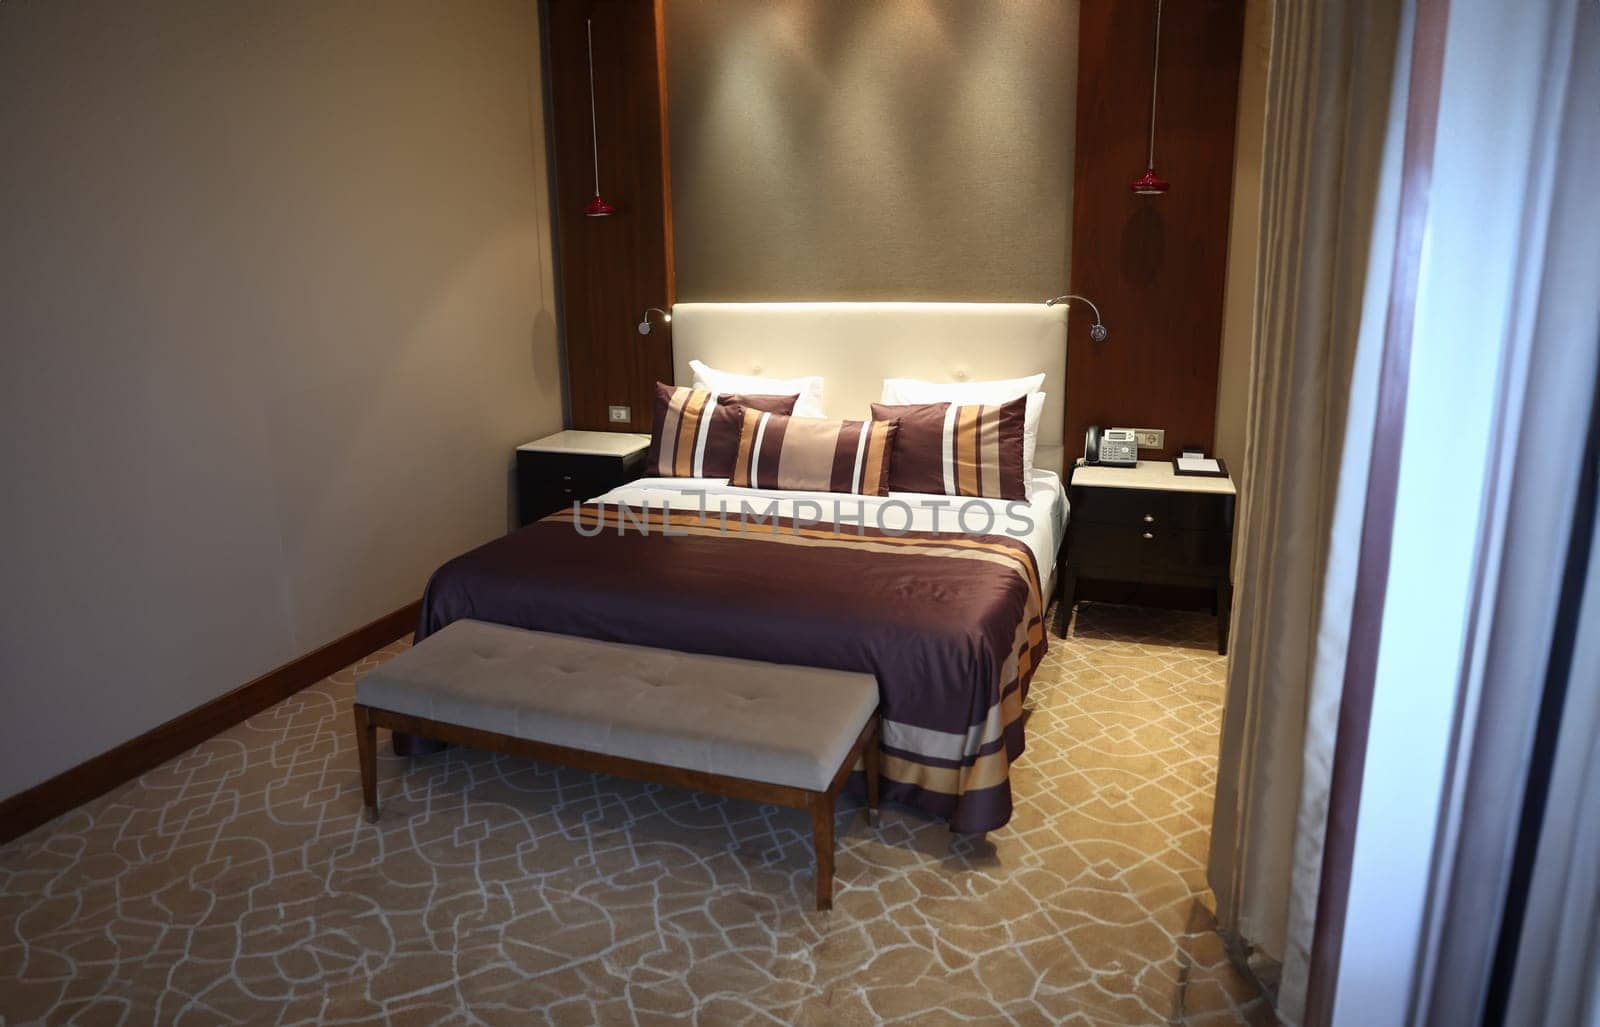 Bed with brown pillows and bedspread in hotel room. Interior design concept